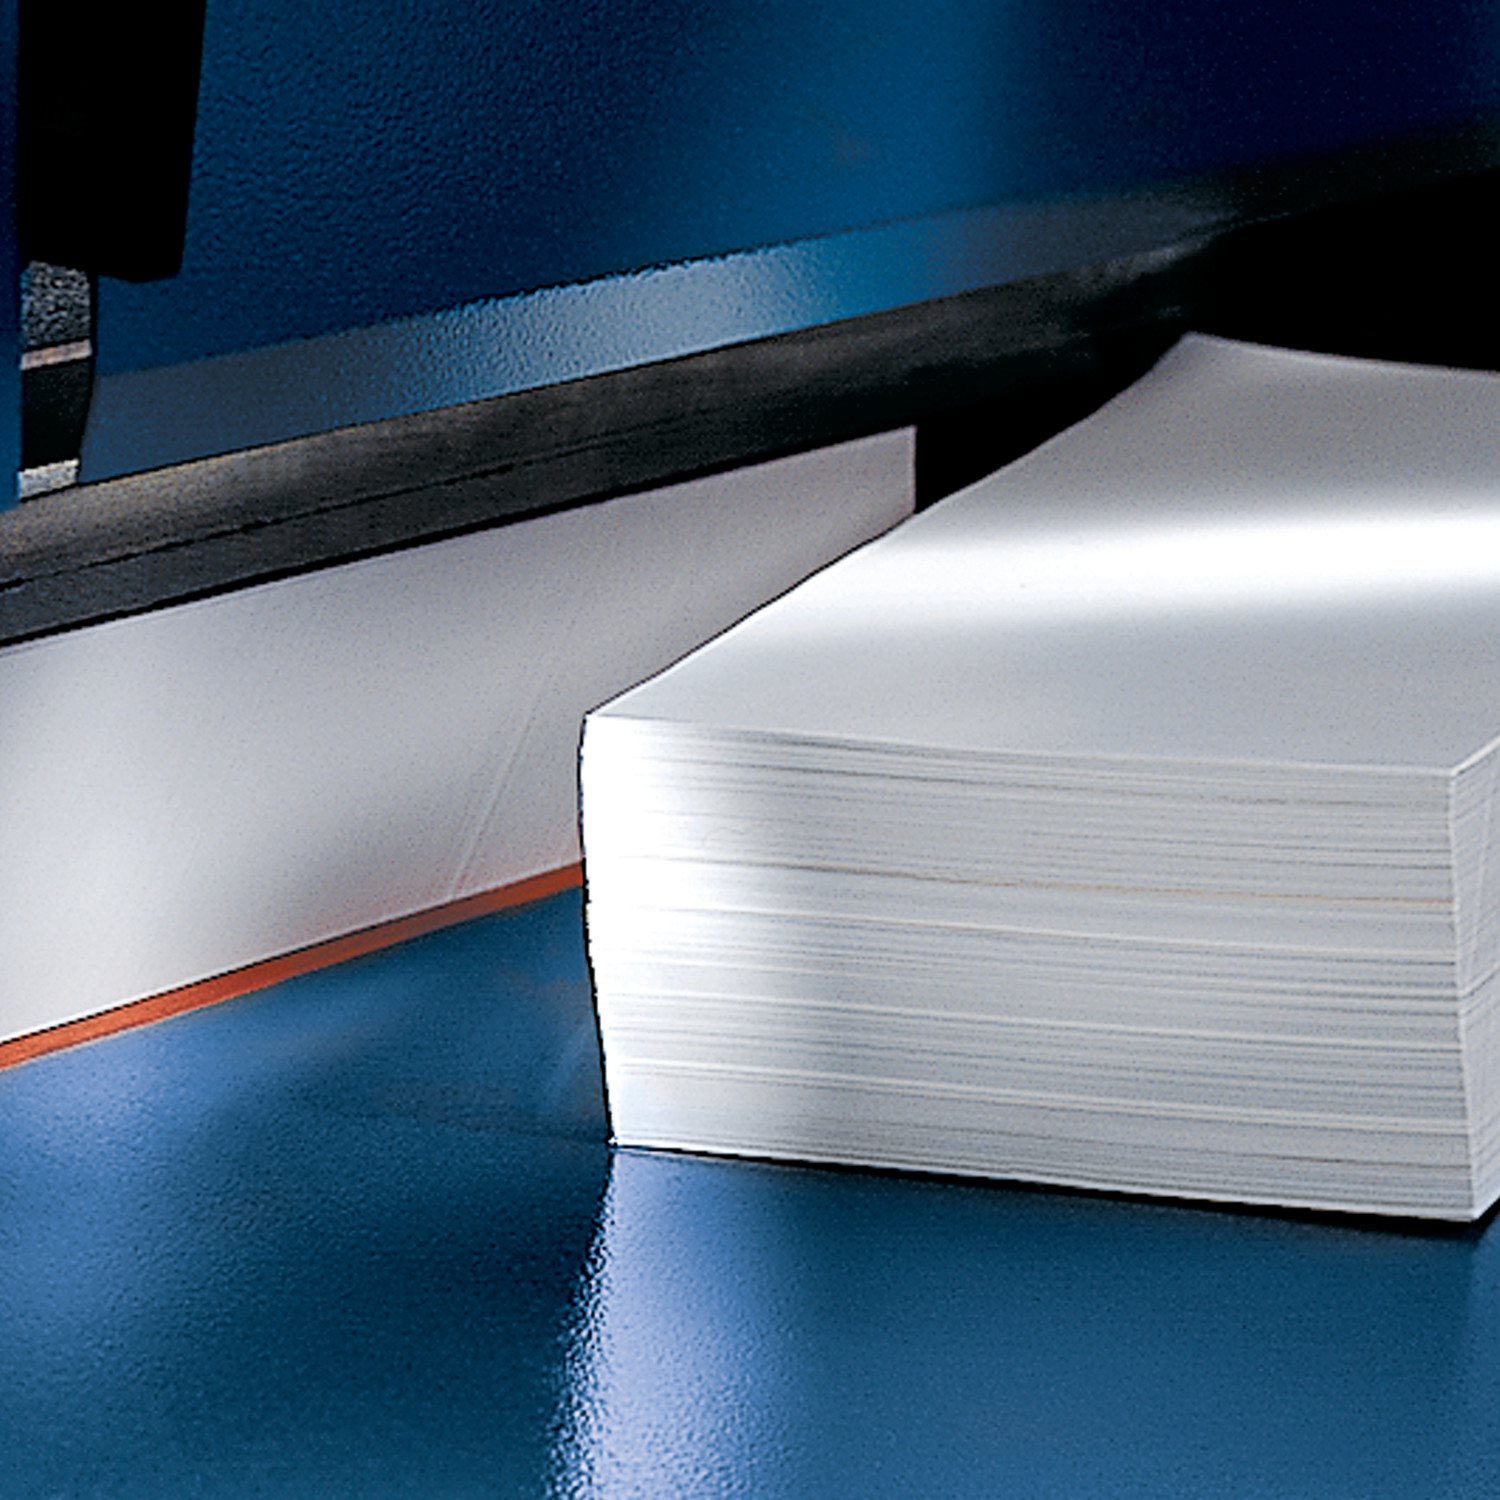 Large quantities of paper can be cut with effortless ease